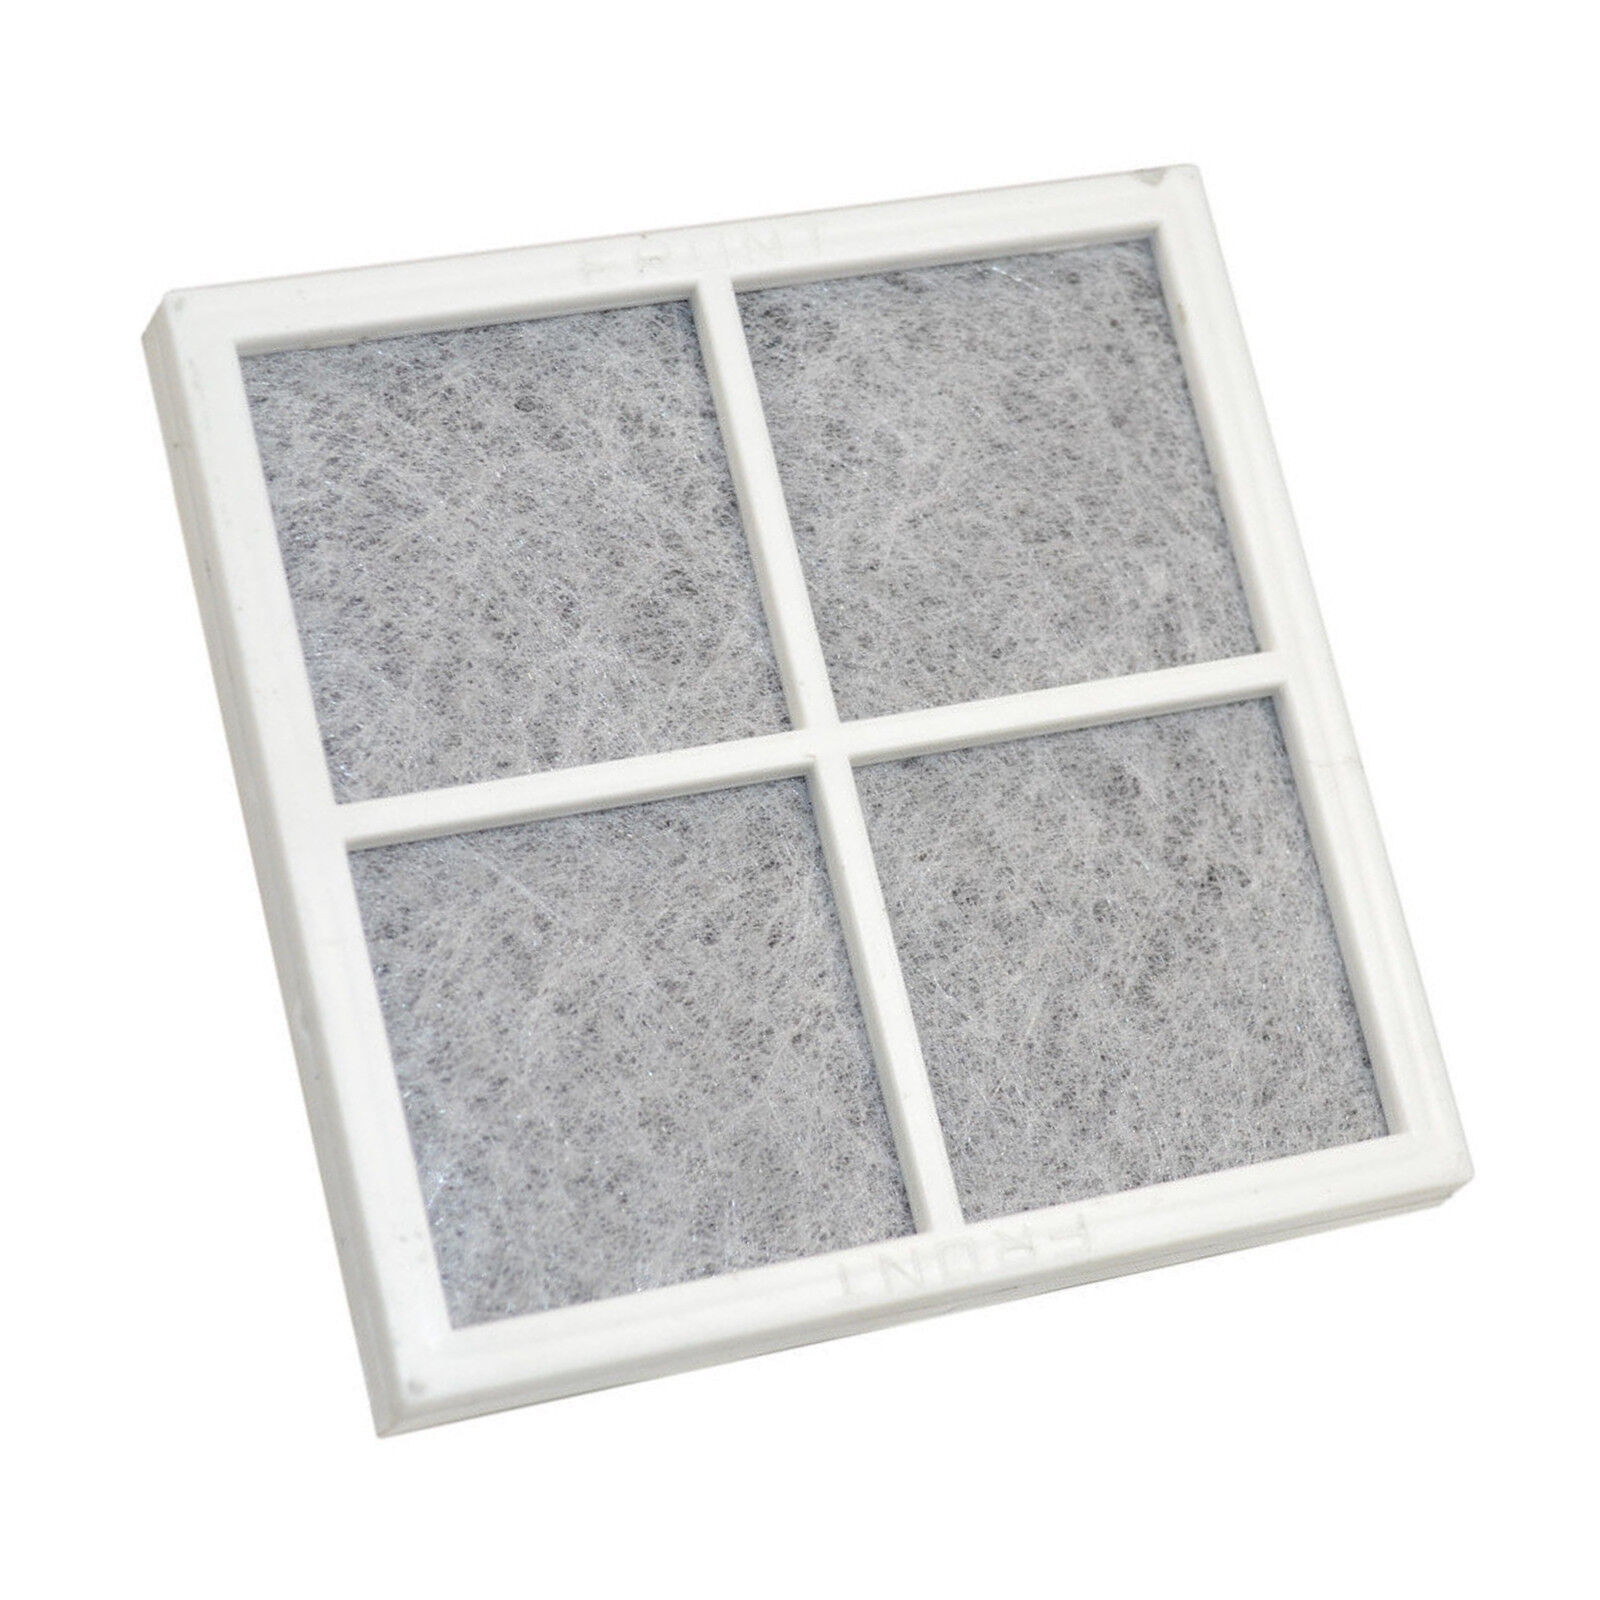 Primary image for Fresh Air Filter for LG LFX29945ST LFX31995ST LFX329345ST LFX32945ST LFXC24726D